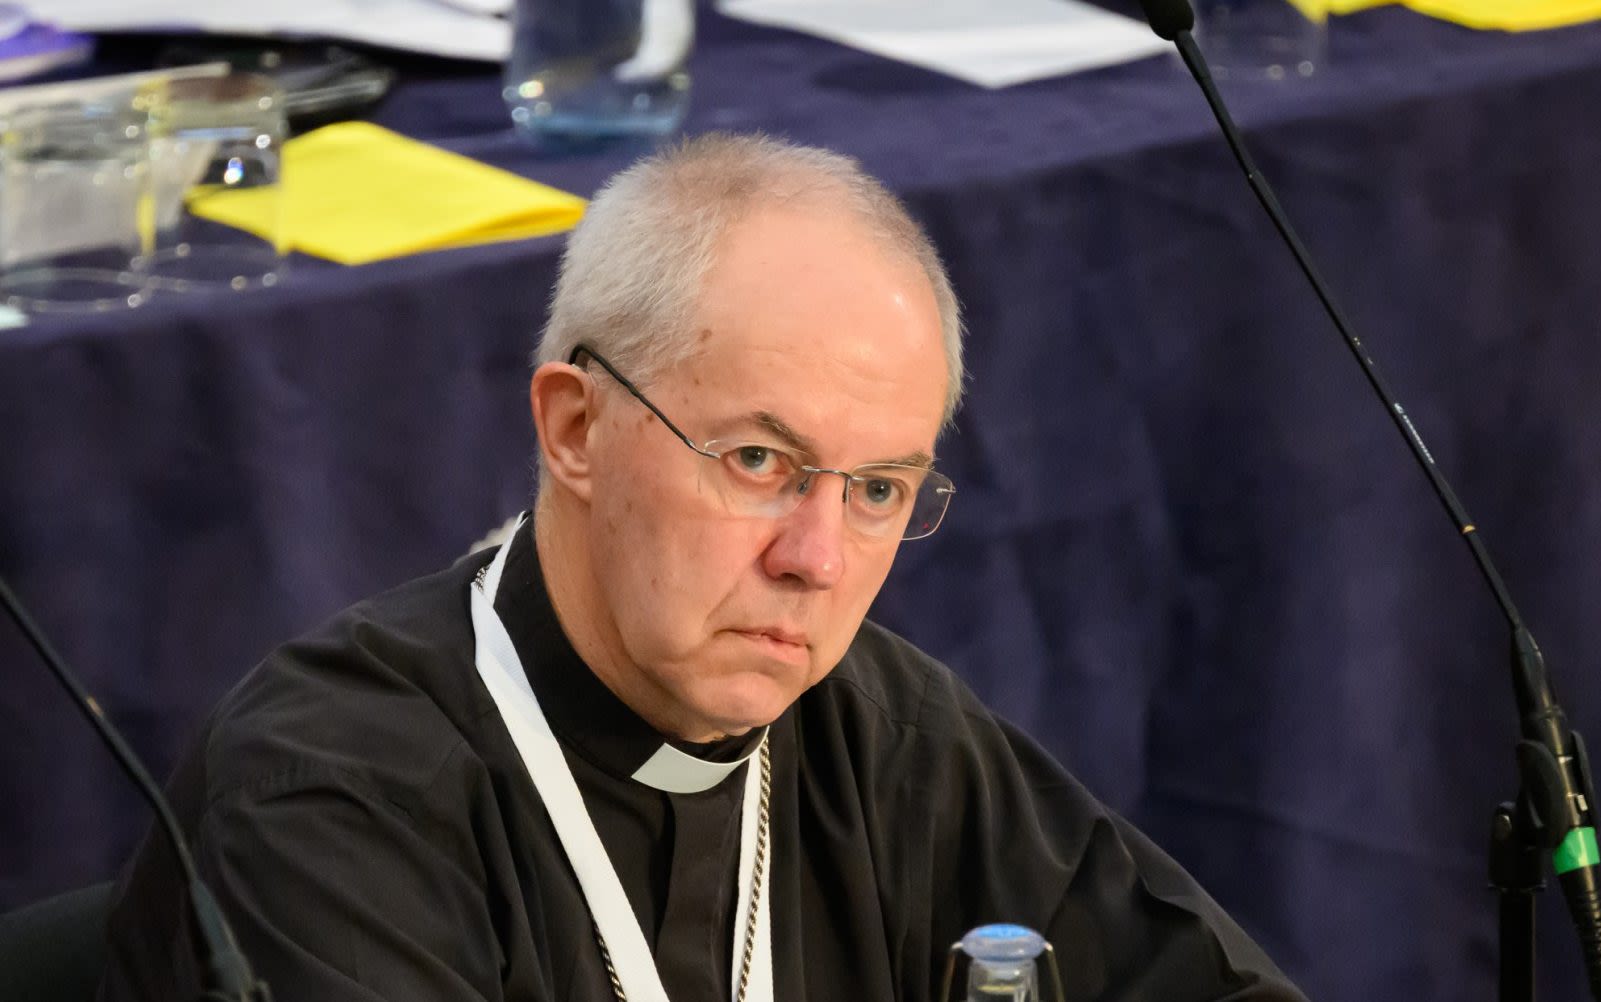 Pipe down, Archbishop Welby, you don’t always need to speak out